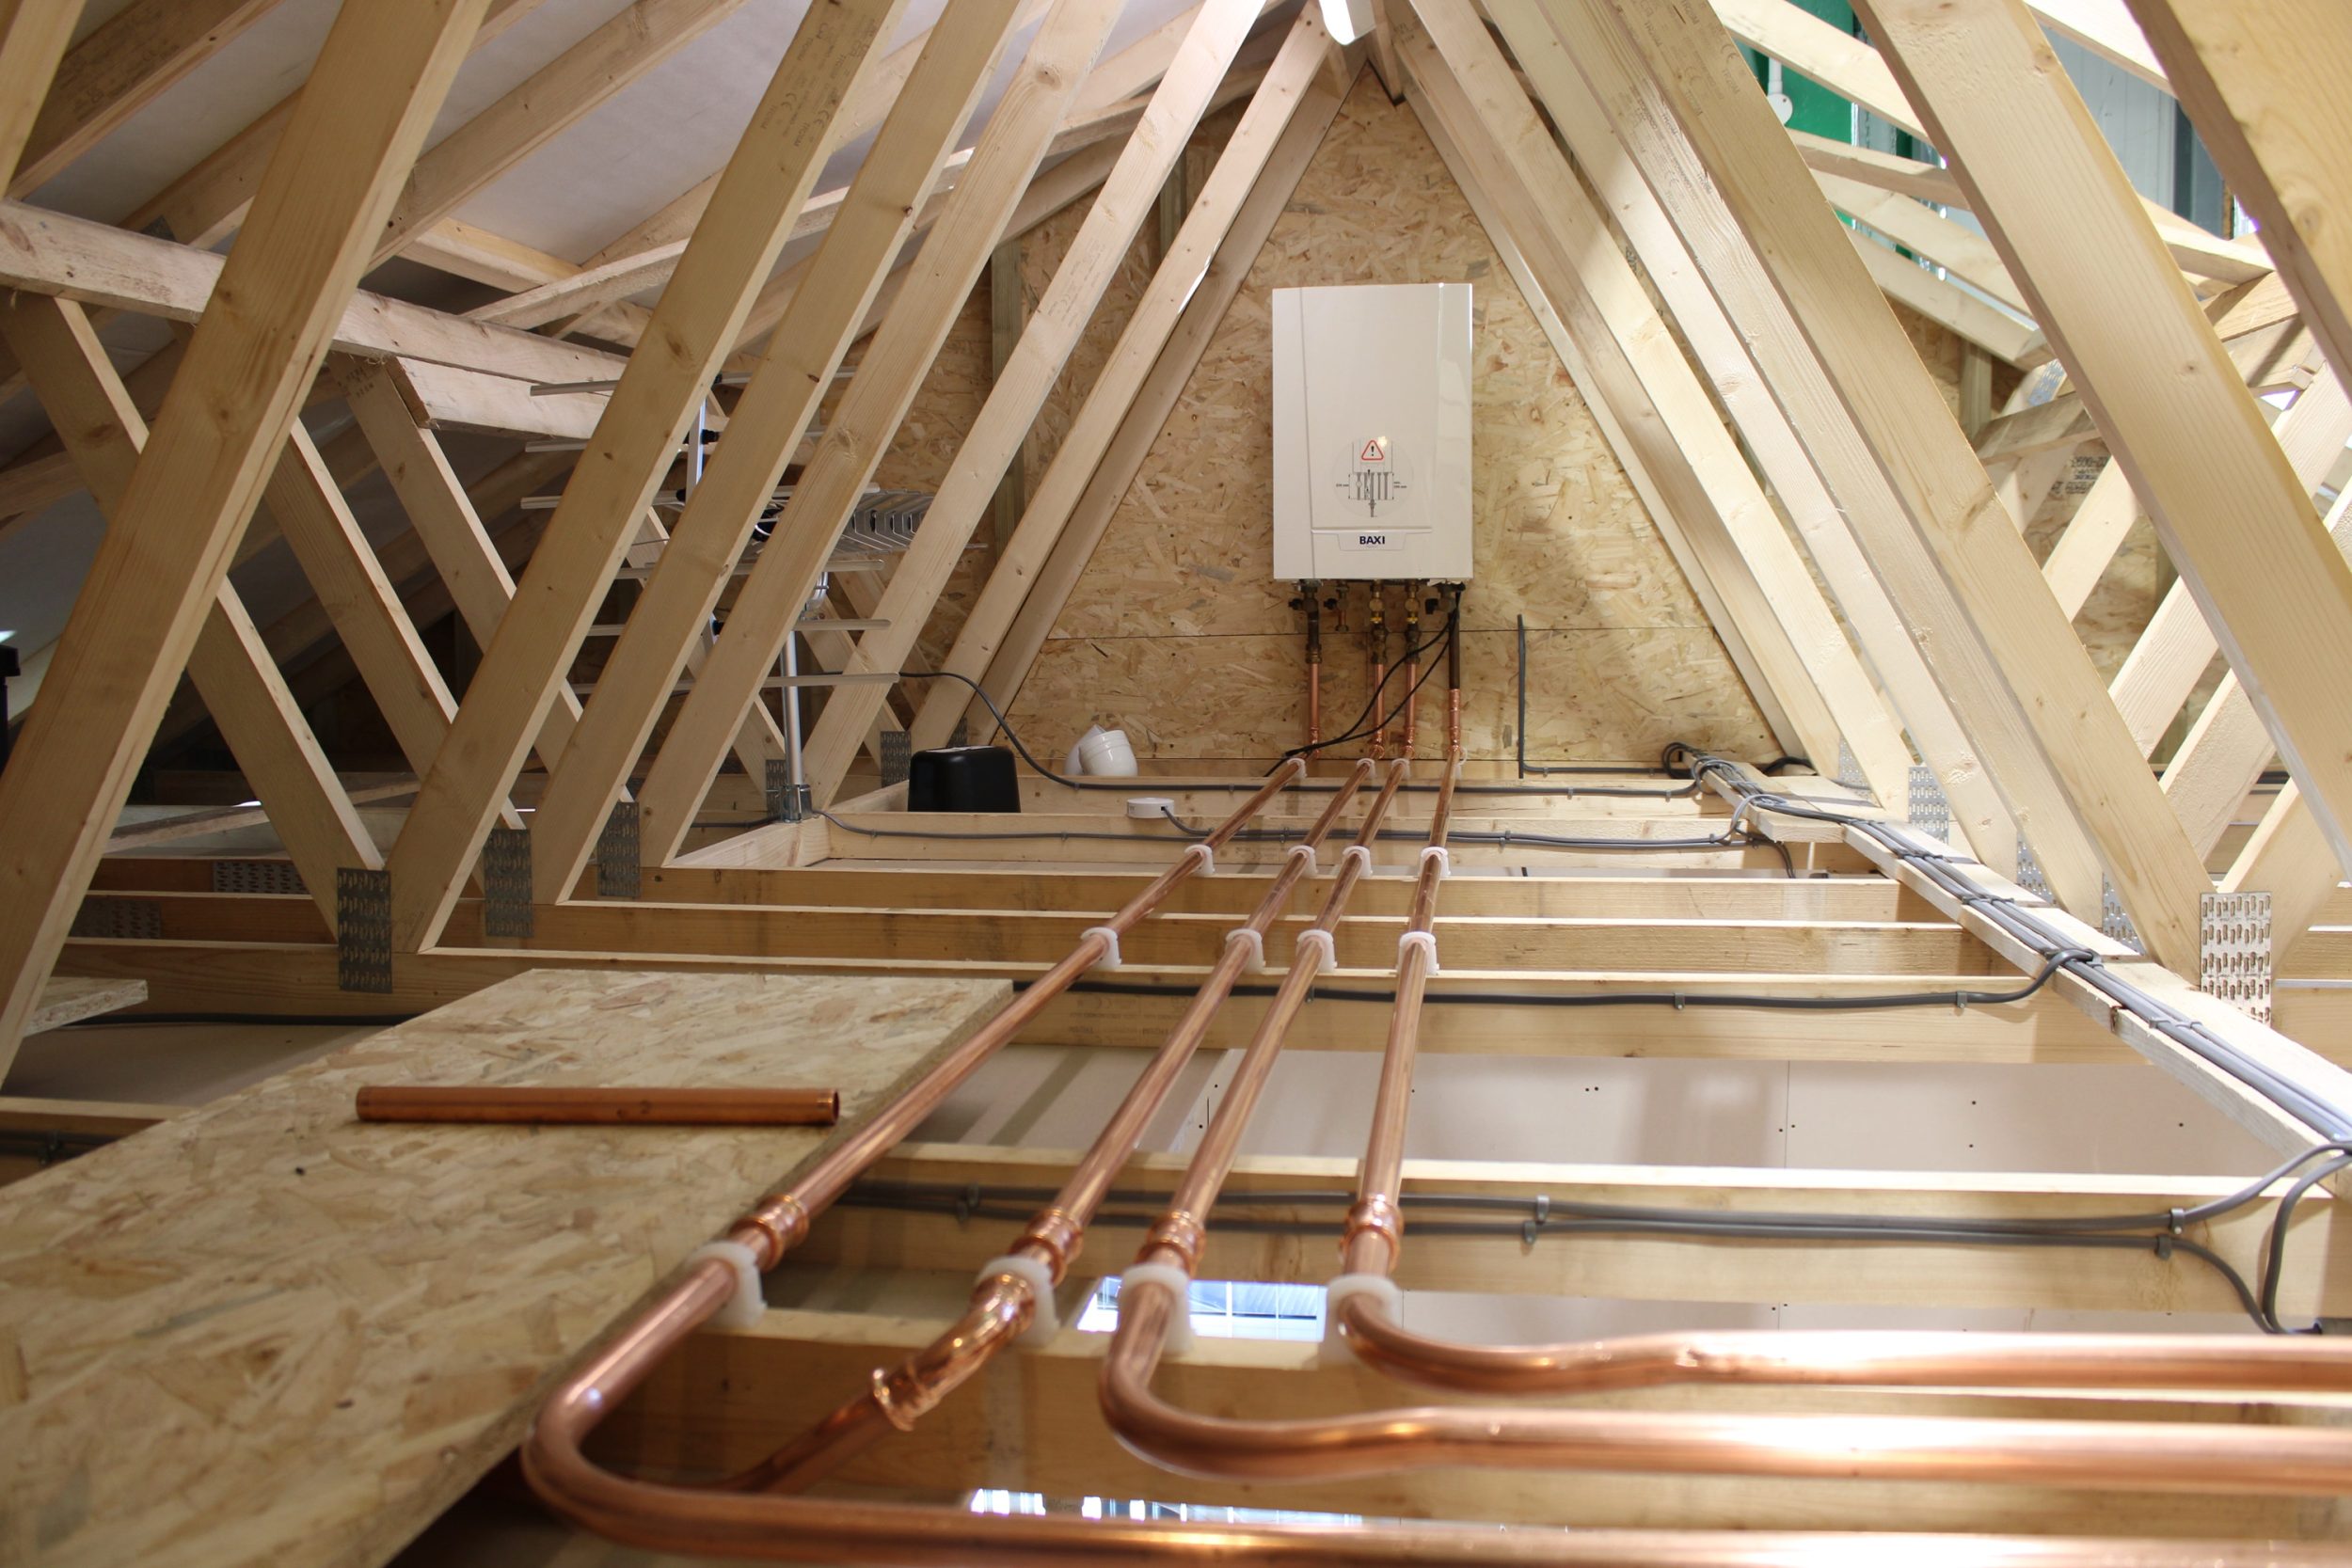 Join the growing energy efficiency retrofit market with funded training